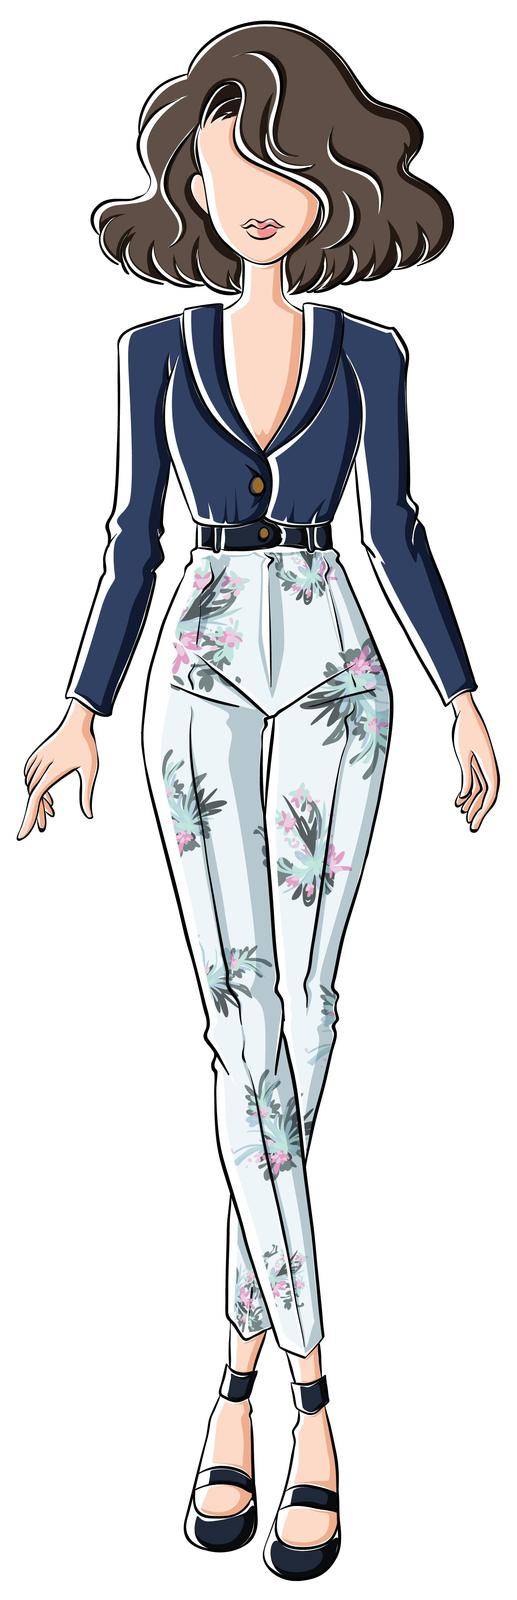 Sketch of a woman in blue top and high waist white pants with flower design